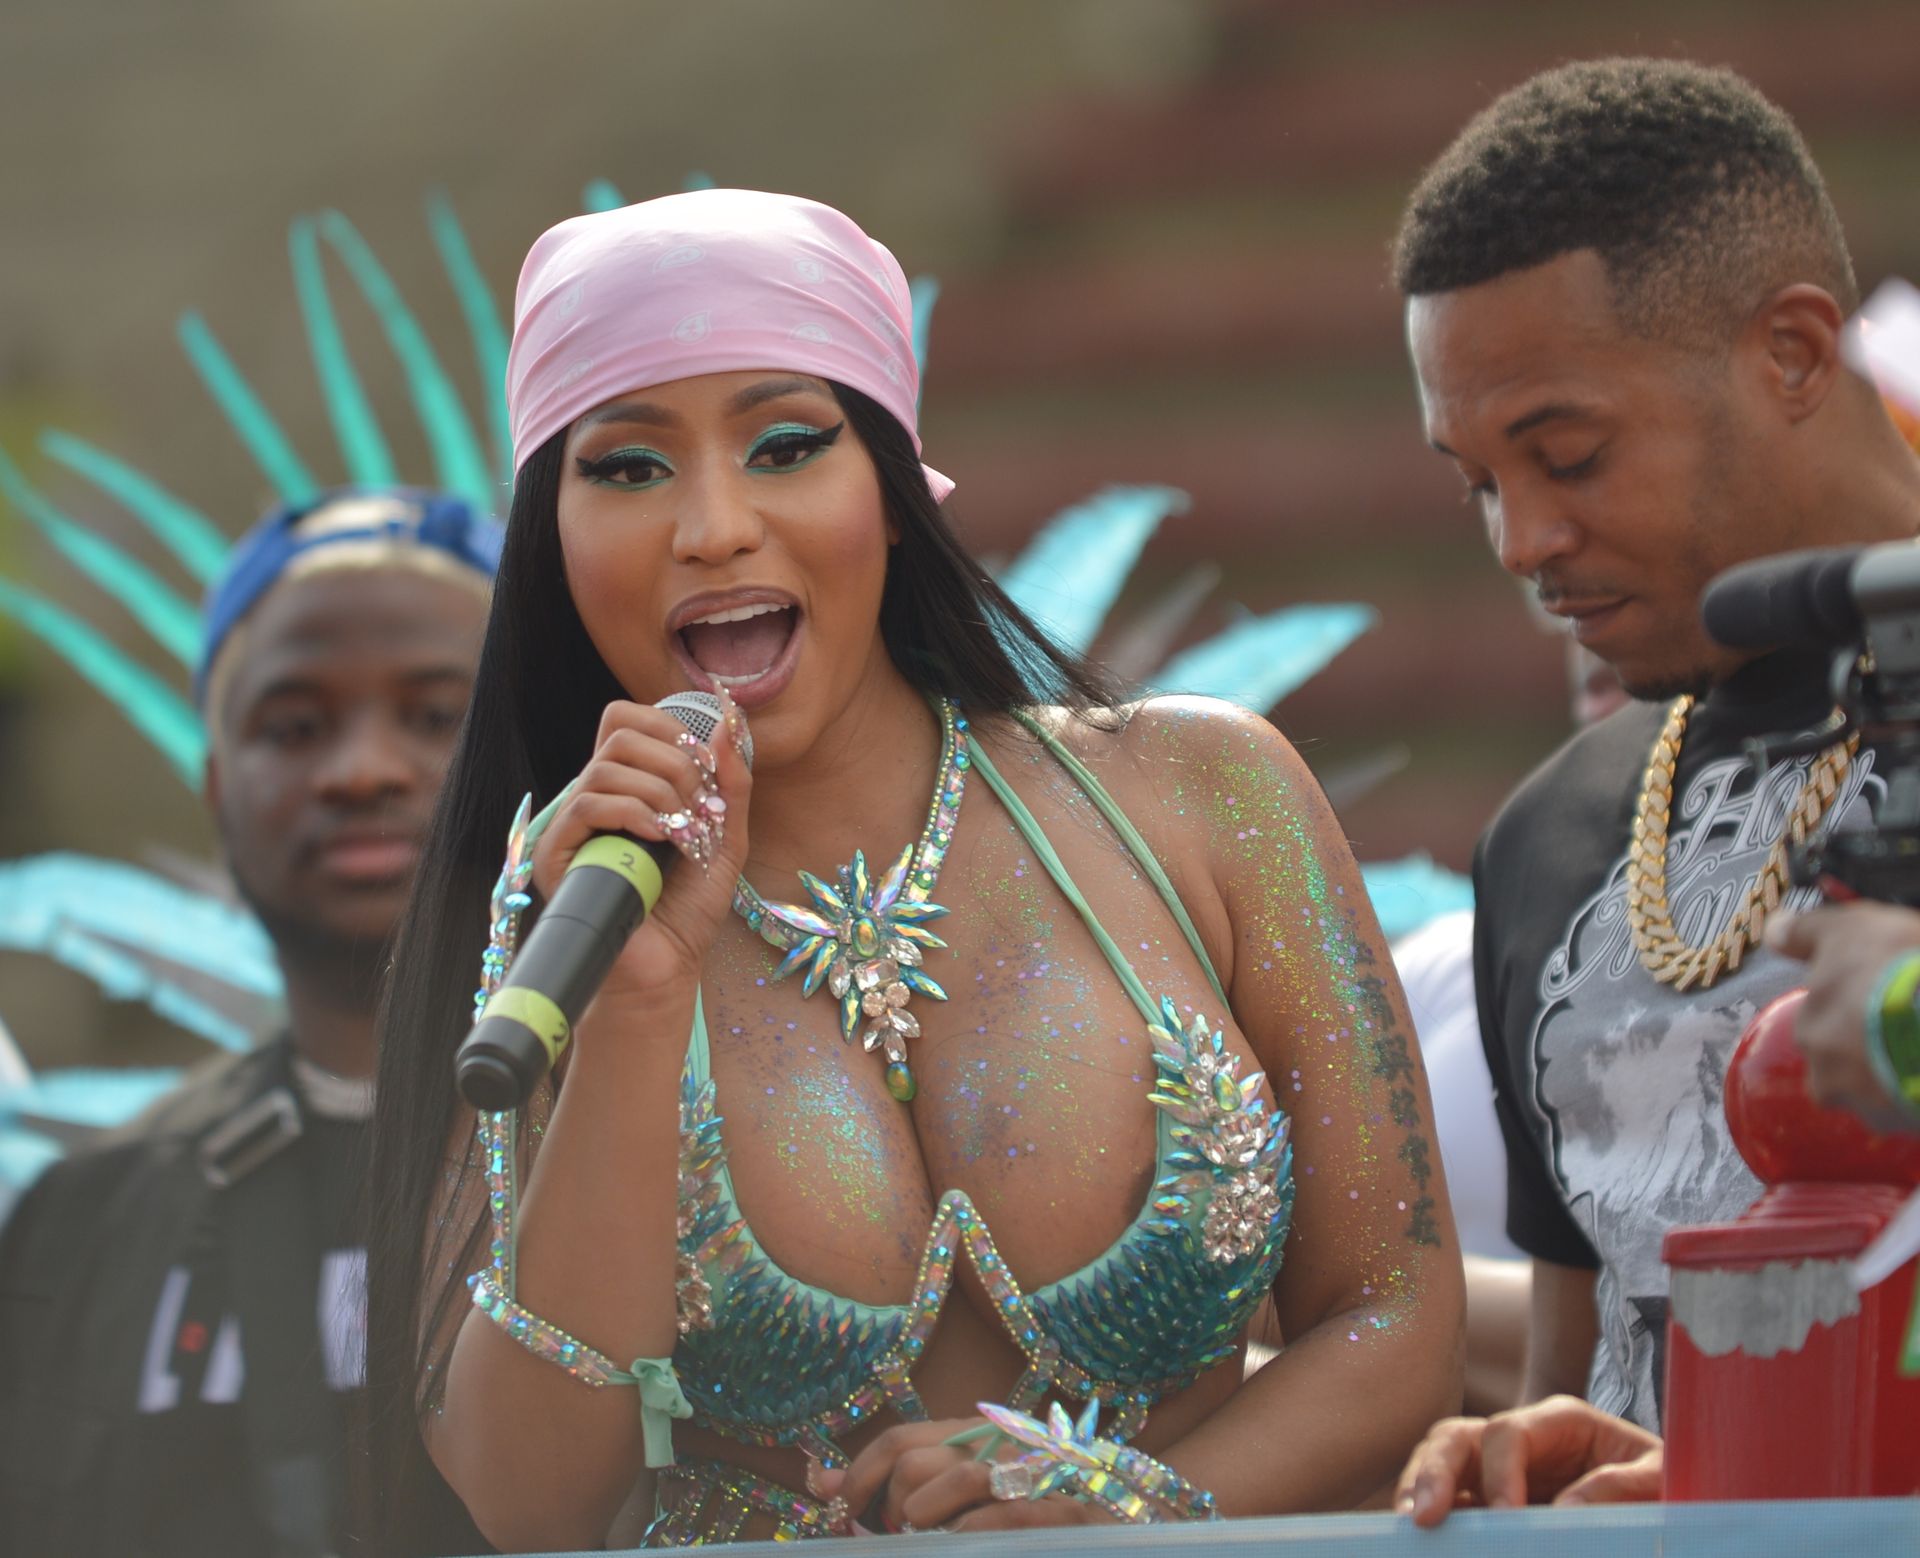 Nicki Minaj Shows Off to the Crowd on Top of a Music Truck at the Socadrome (17 Photos)